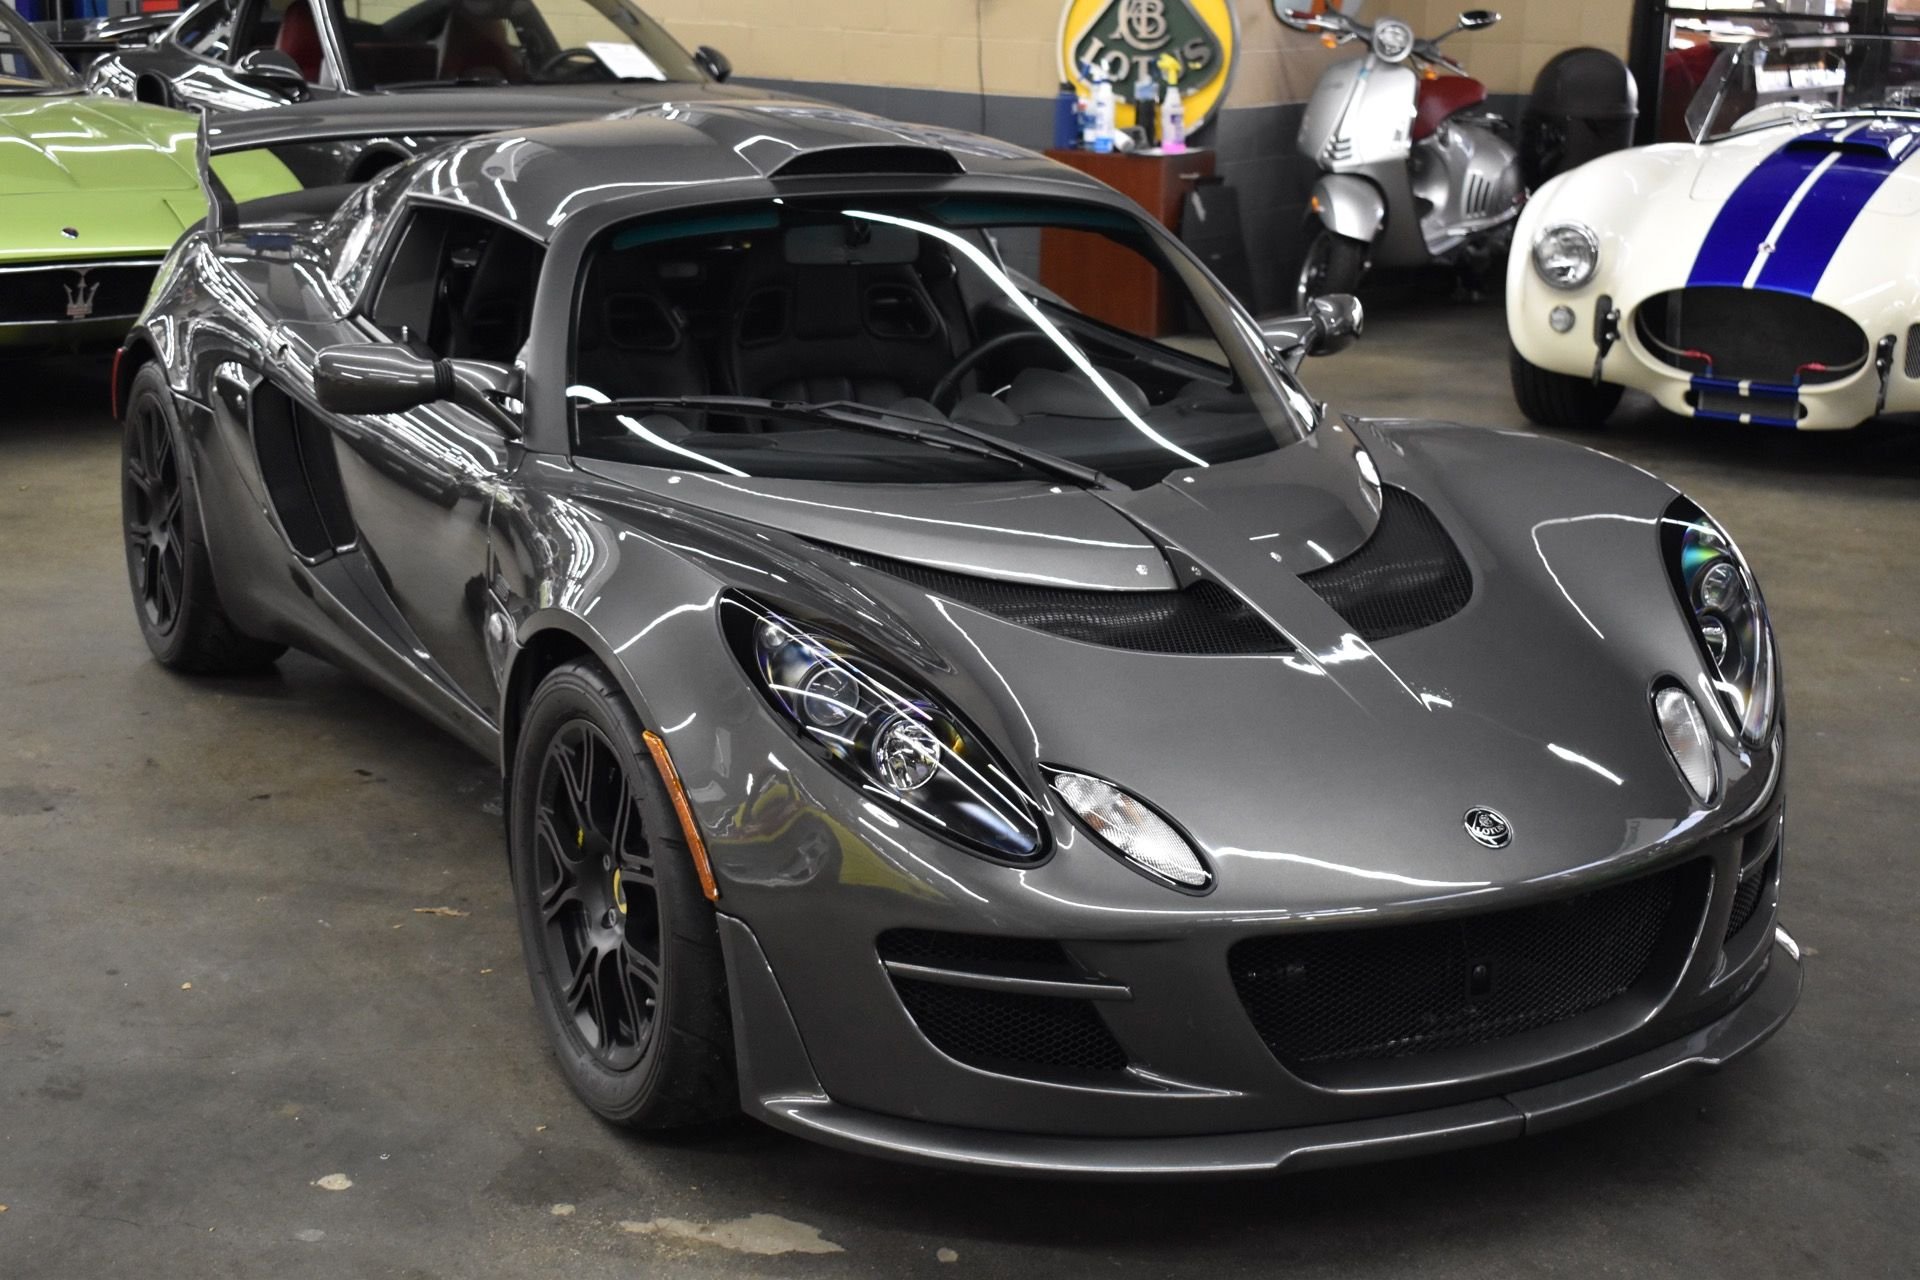 2011 Lotus Exige S 260 Roger Becker Edition | Autosport Designs, Inc. |  Exotic, Vintage, and Classic Car Sales